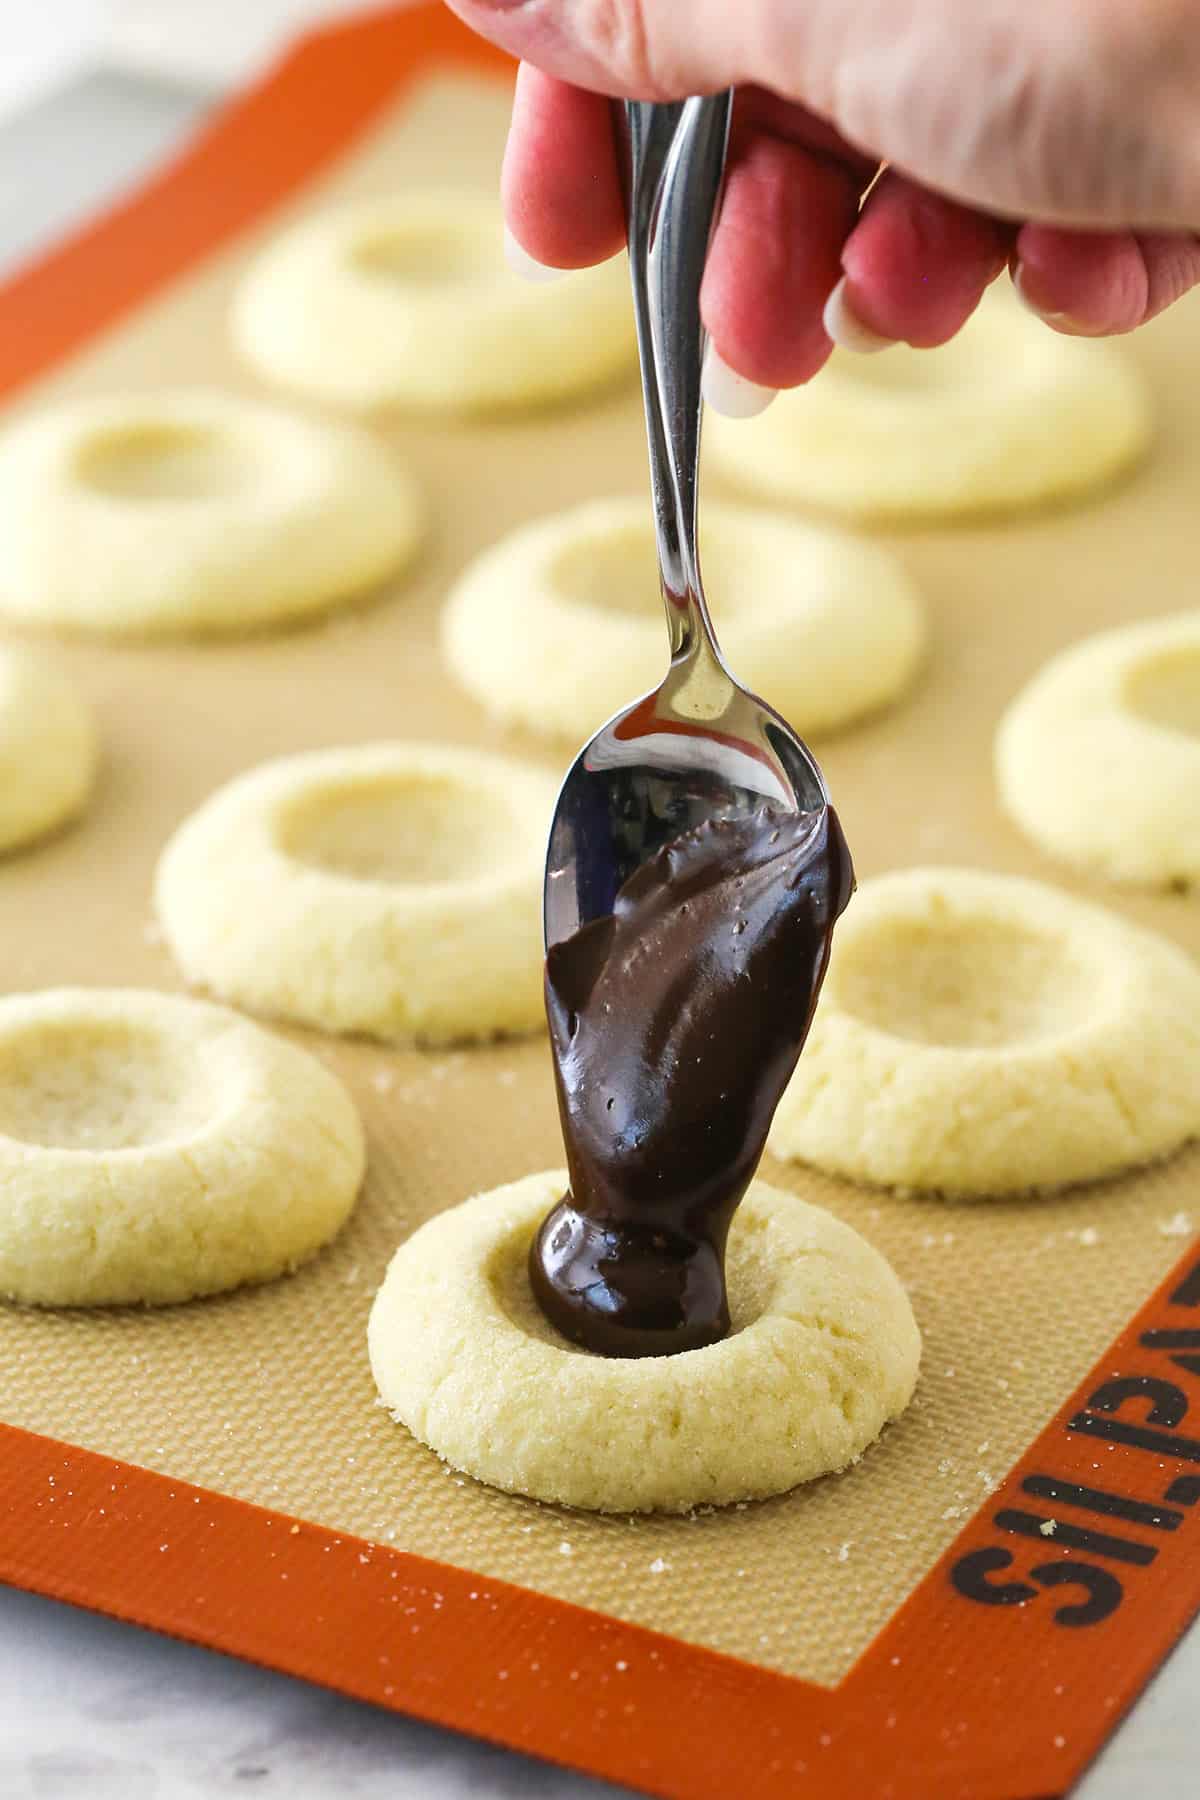 adding chocolate ganache to the center of a baked cookie